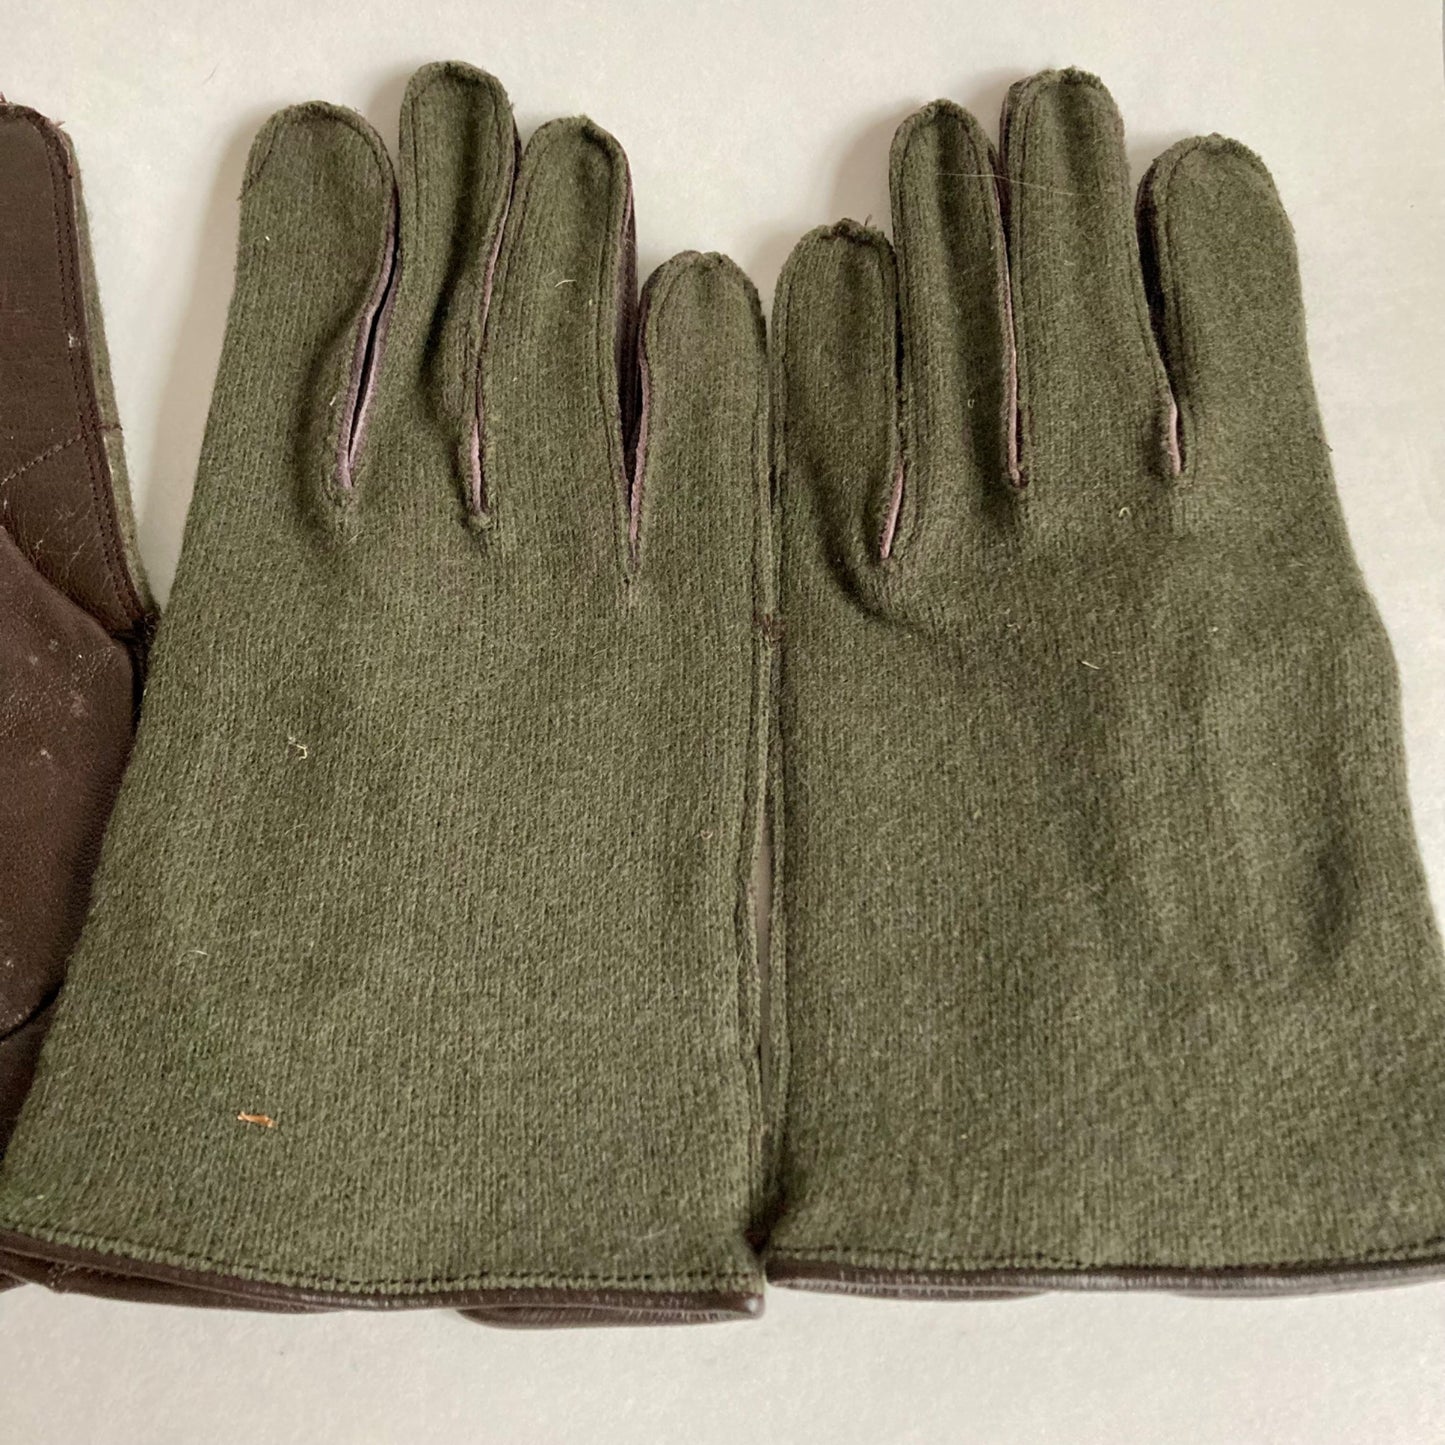 Vintage Lot 2 Pairs European Military Gloves Leather Wool